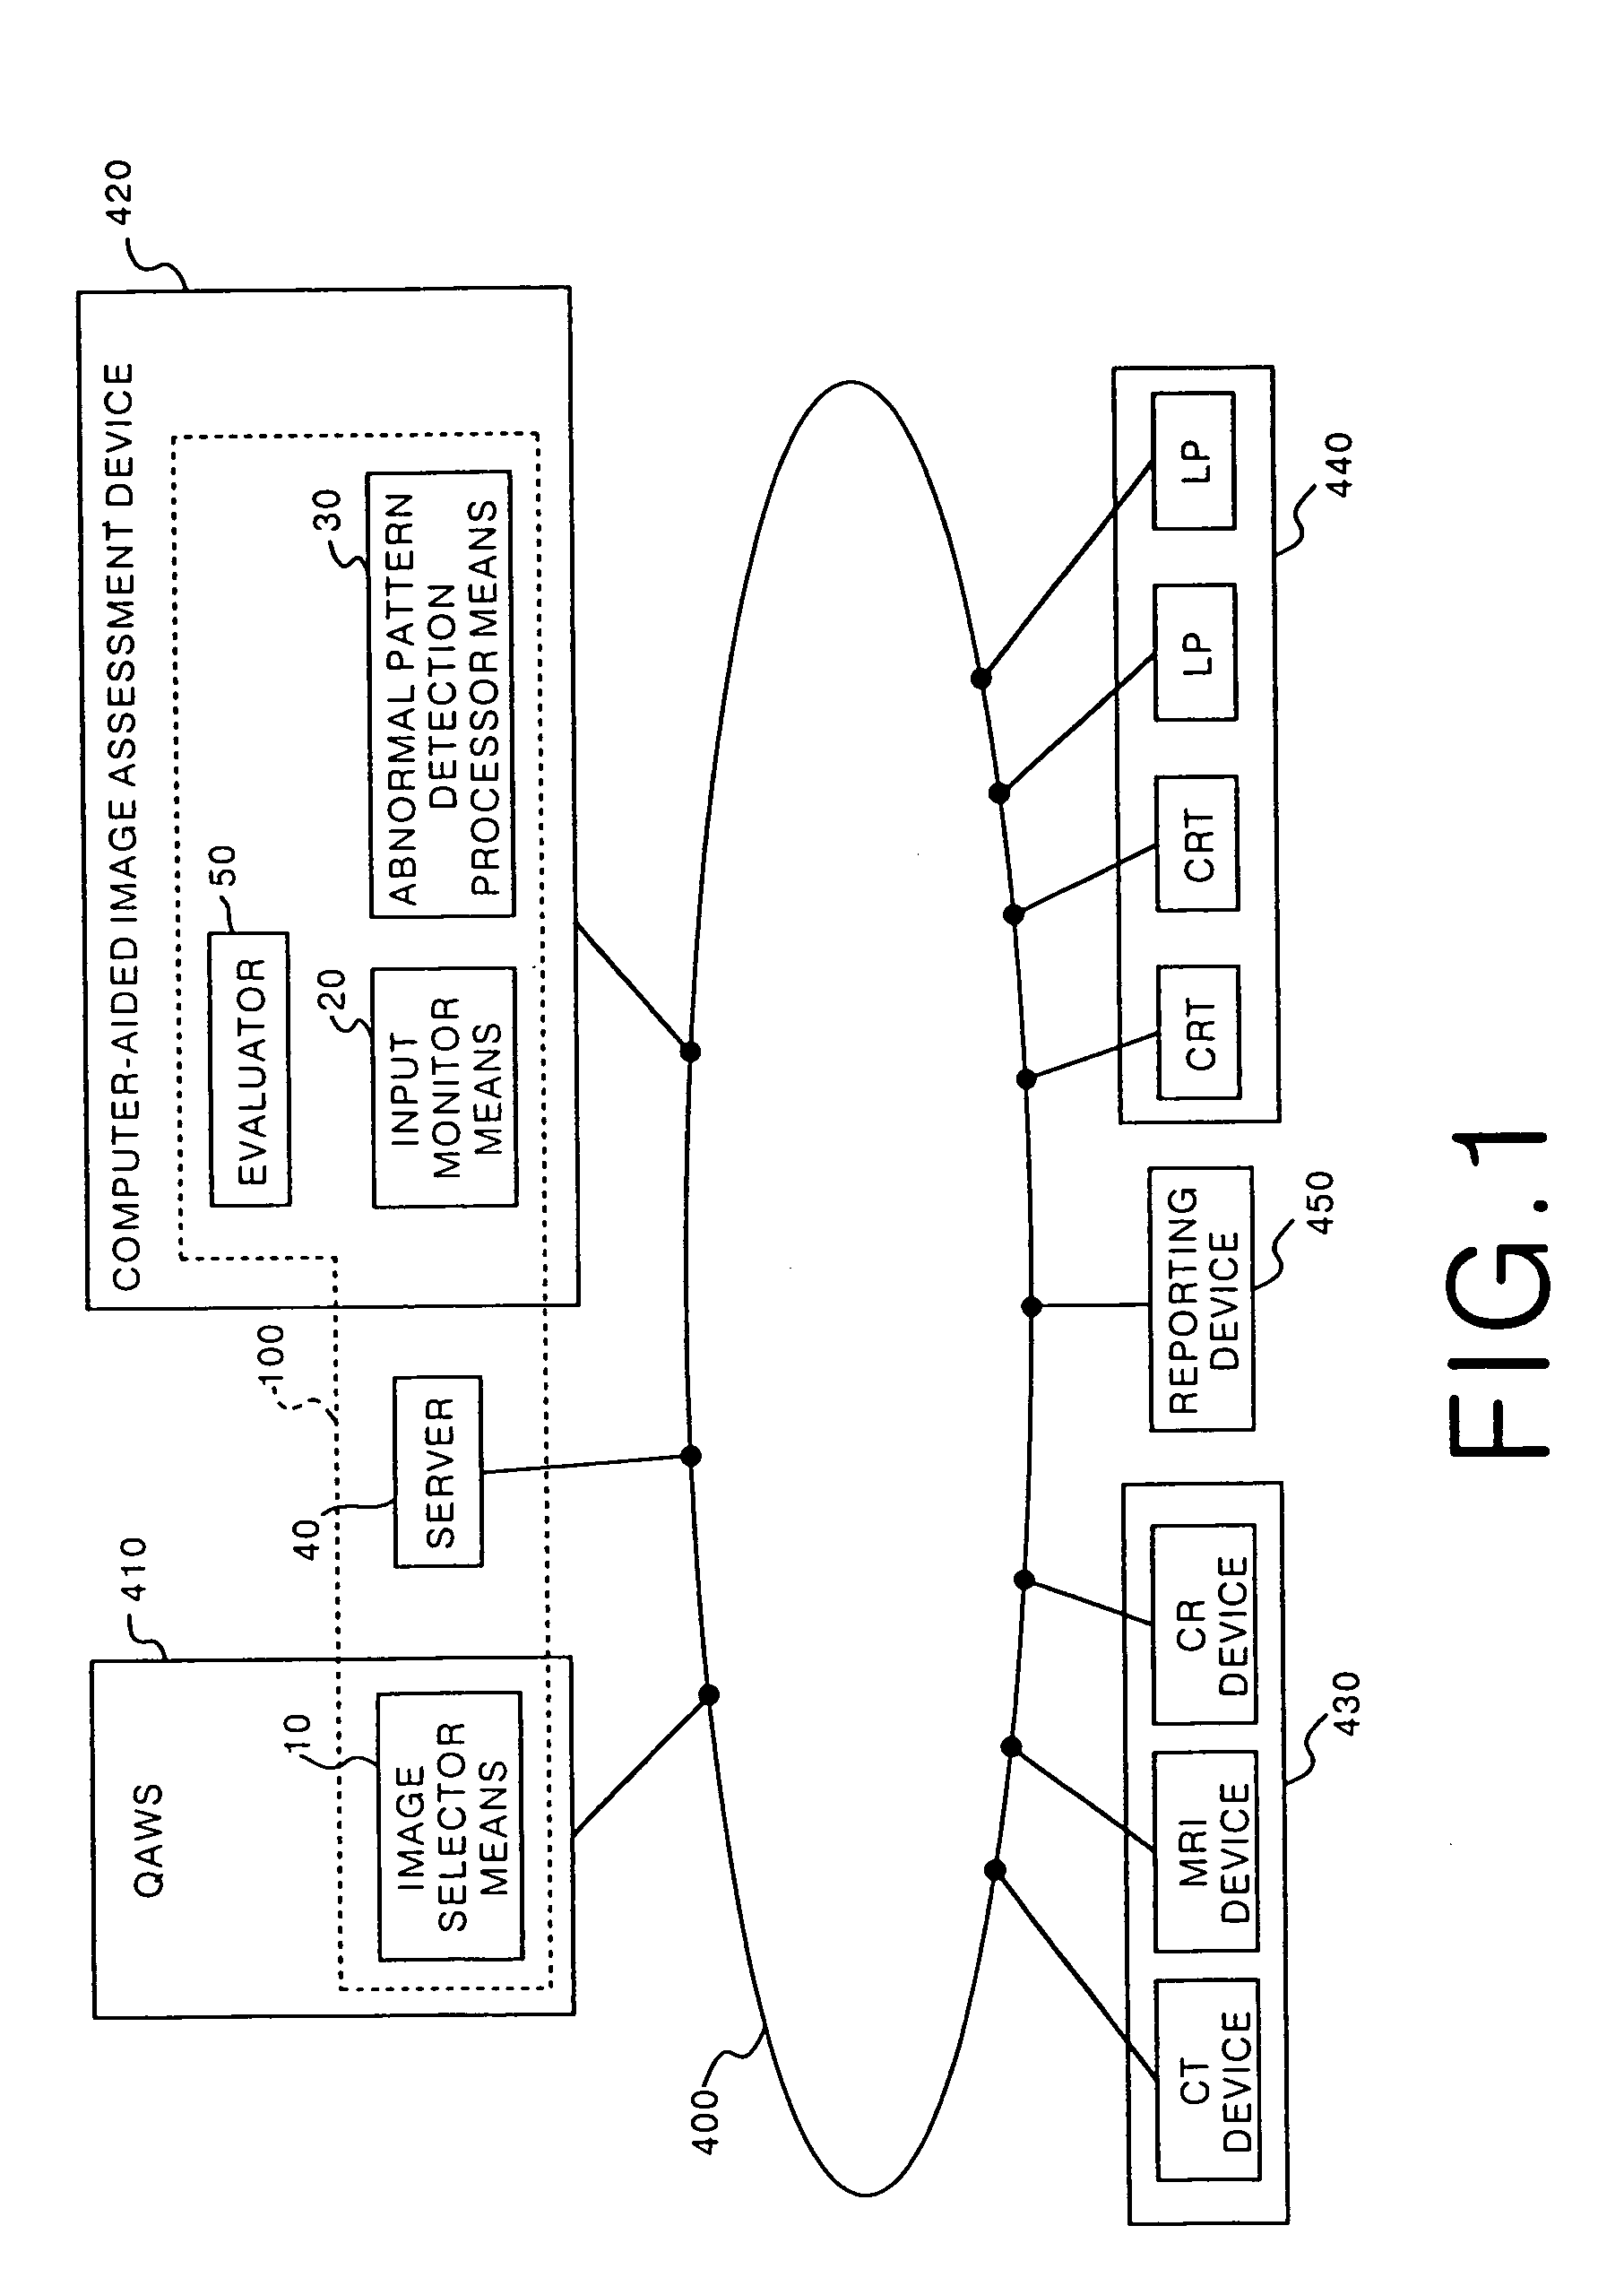 Abnormal pattern detection processing method and system